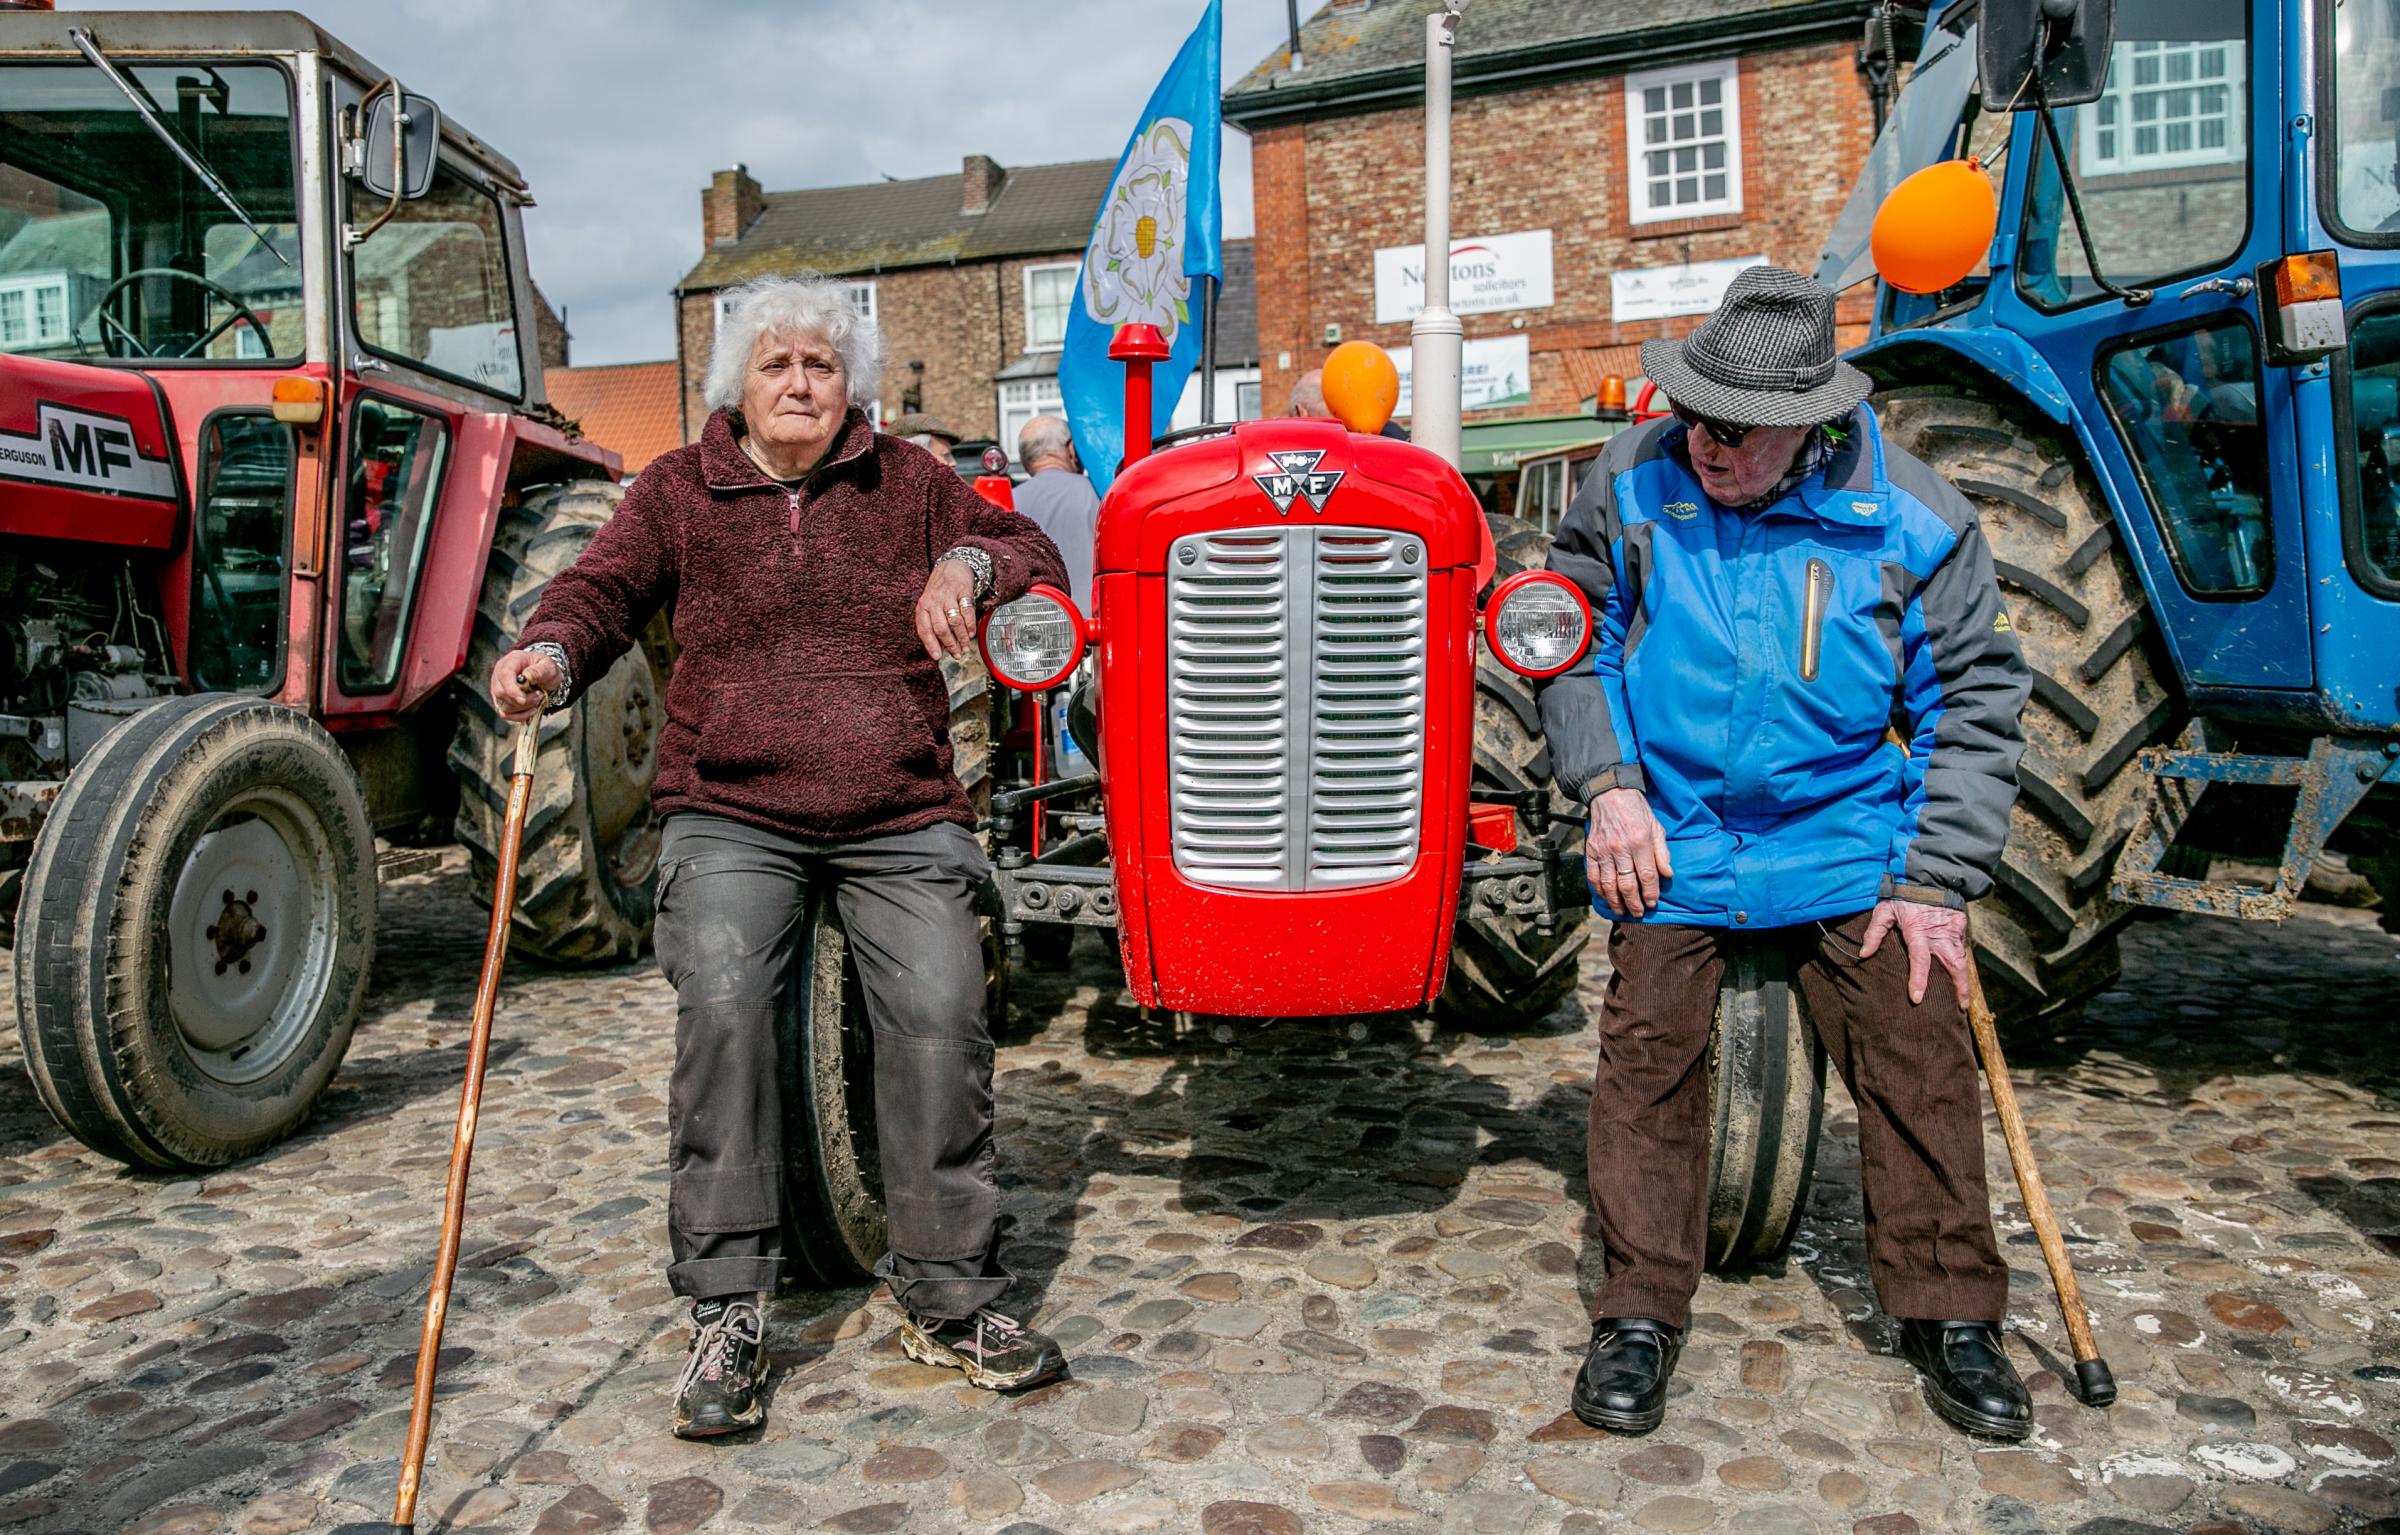 Tv Vet Peter Wright tractor run for Thirsk Hospice charity pictured Jean and Stephen Green Picture: SARAH CALDECOTT